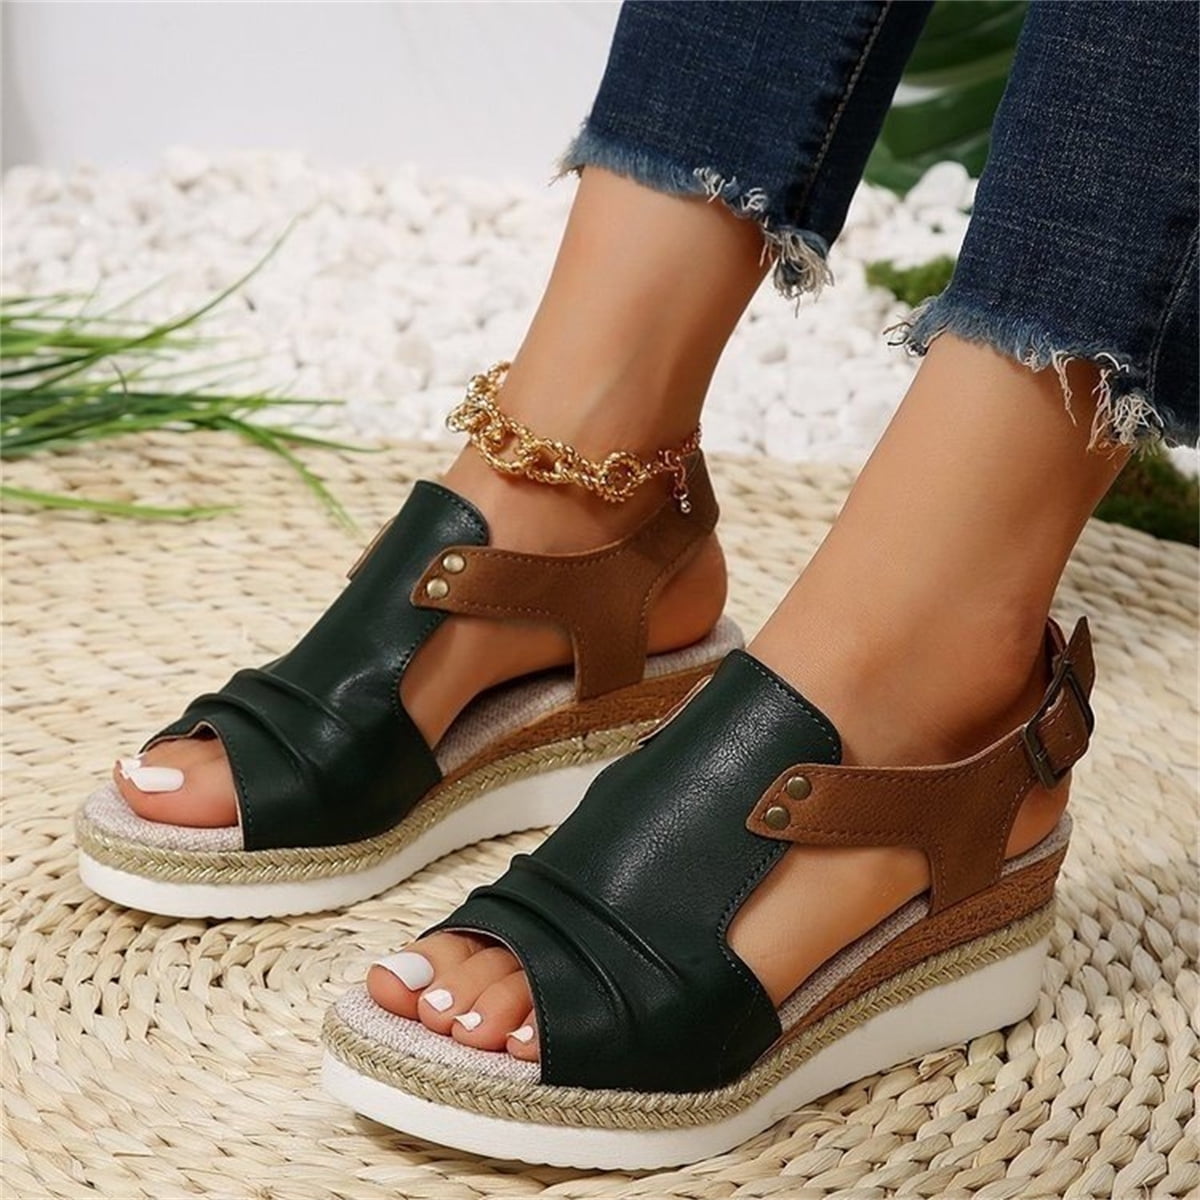 T-Space Women's Stylish Espadrilles Wedge Sandal  Open Toe Ankle Buckle Strap Shoes,Comfy Wedge Shoes Brown